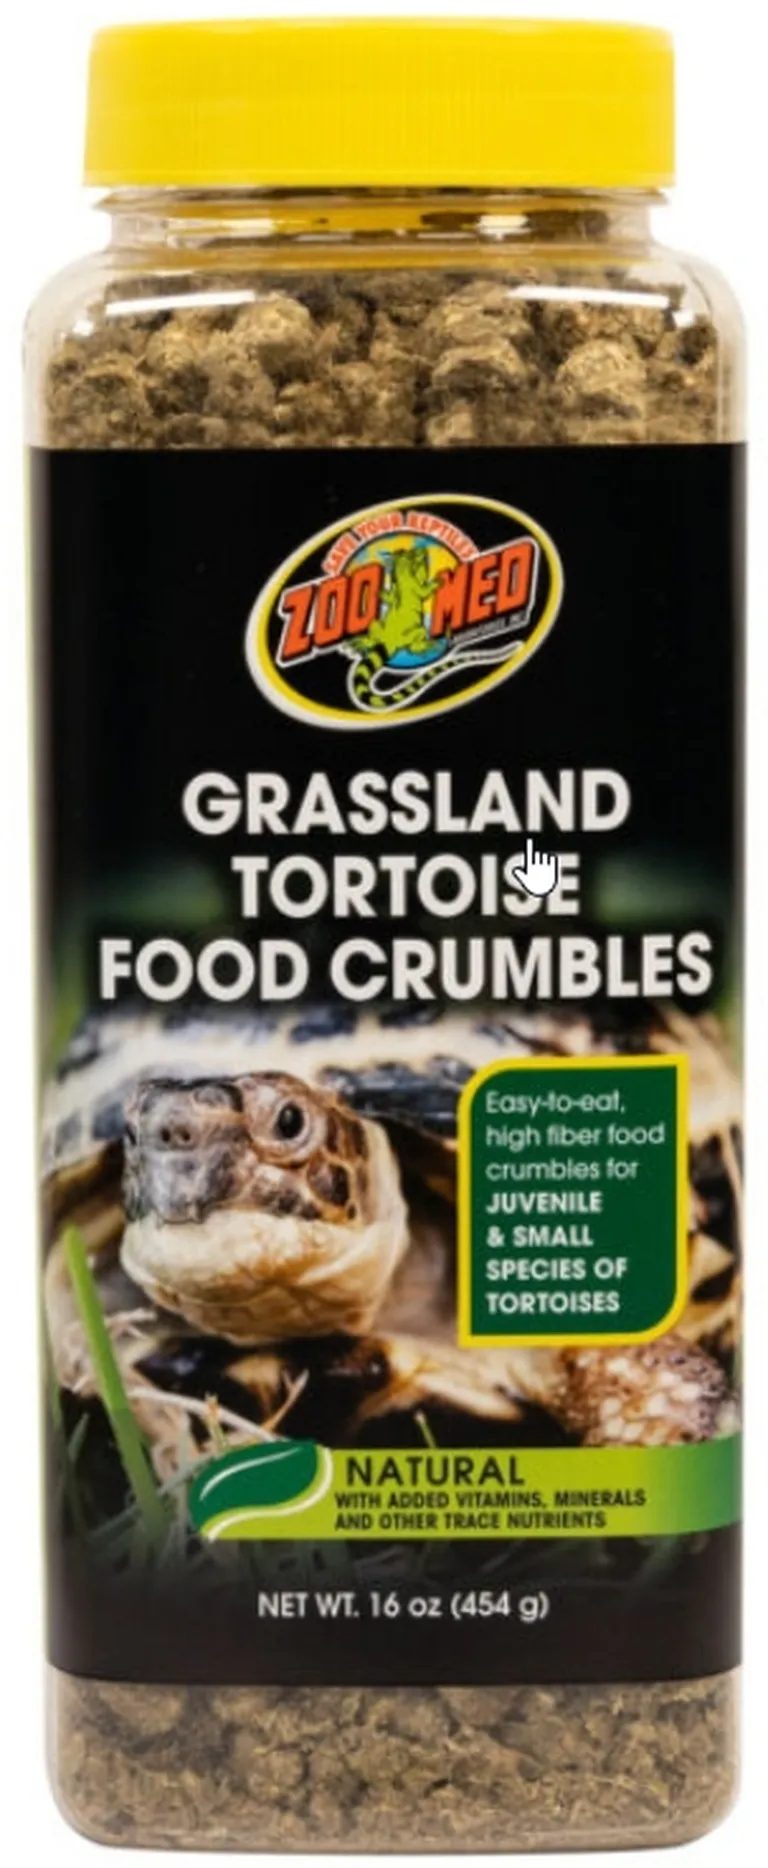 Zoo Med Grassland Tortoise Food Crumbles Photo 1